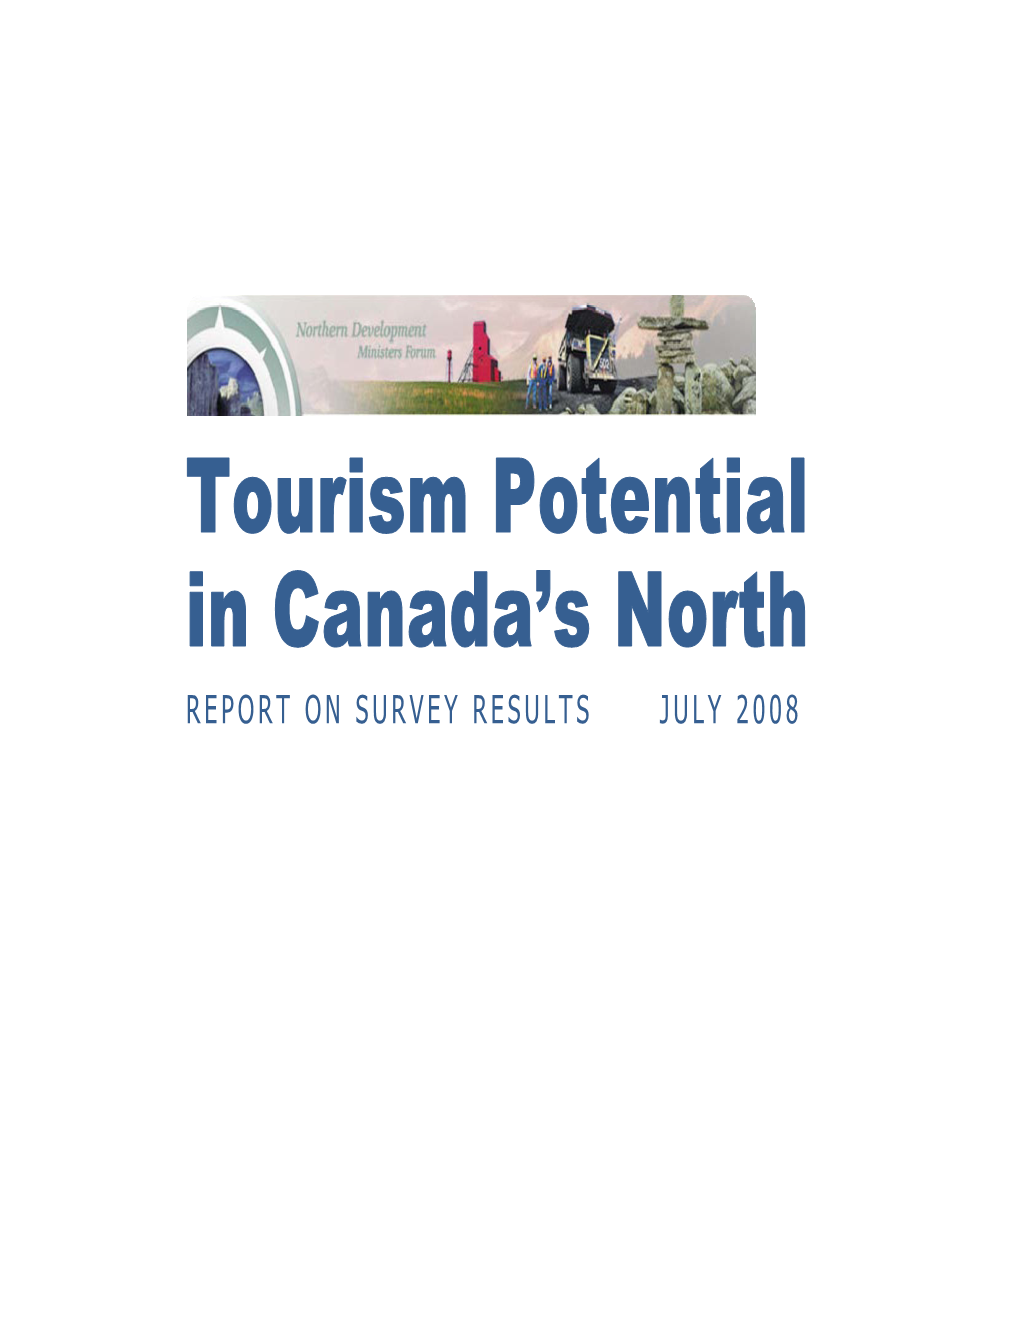 Tourism Potential in Canada's North